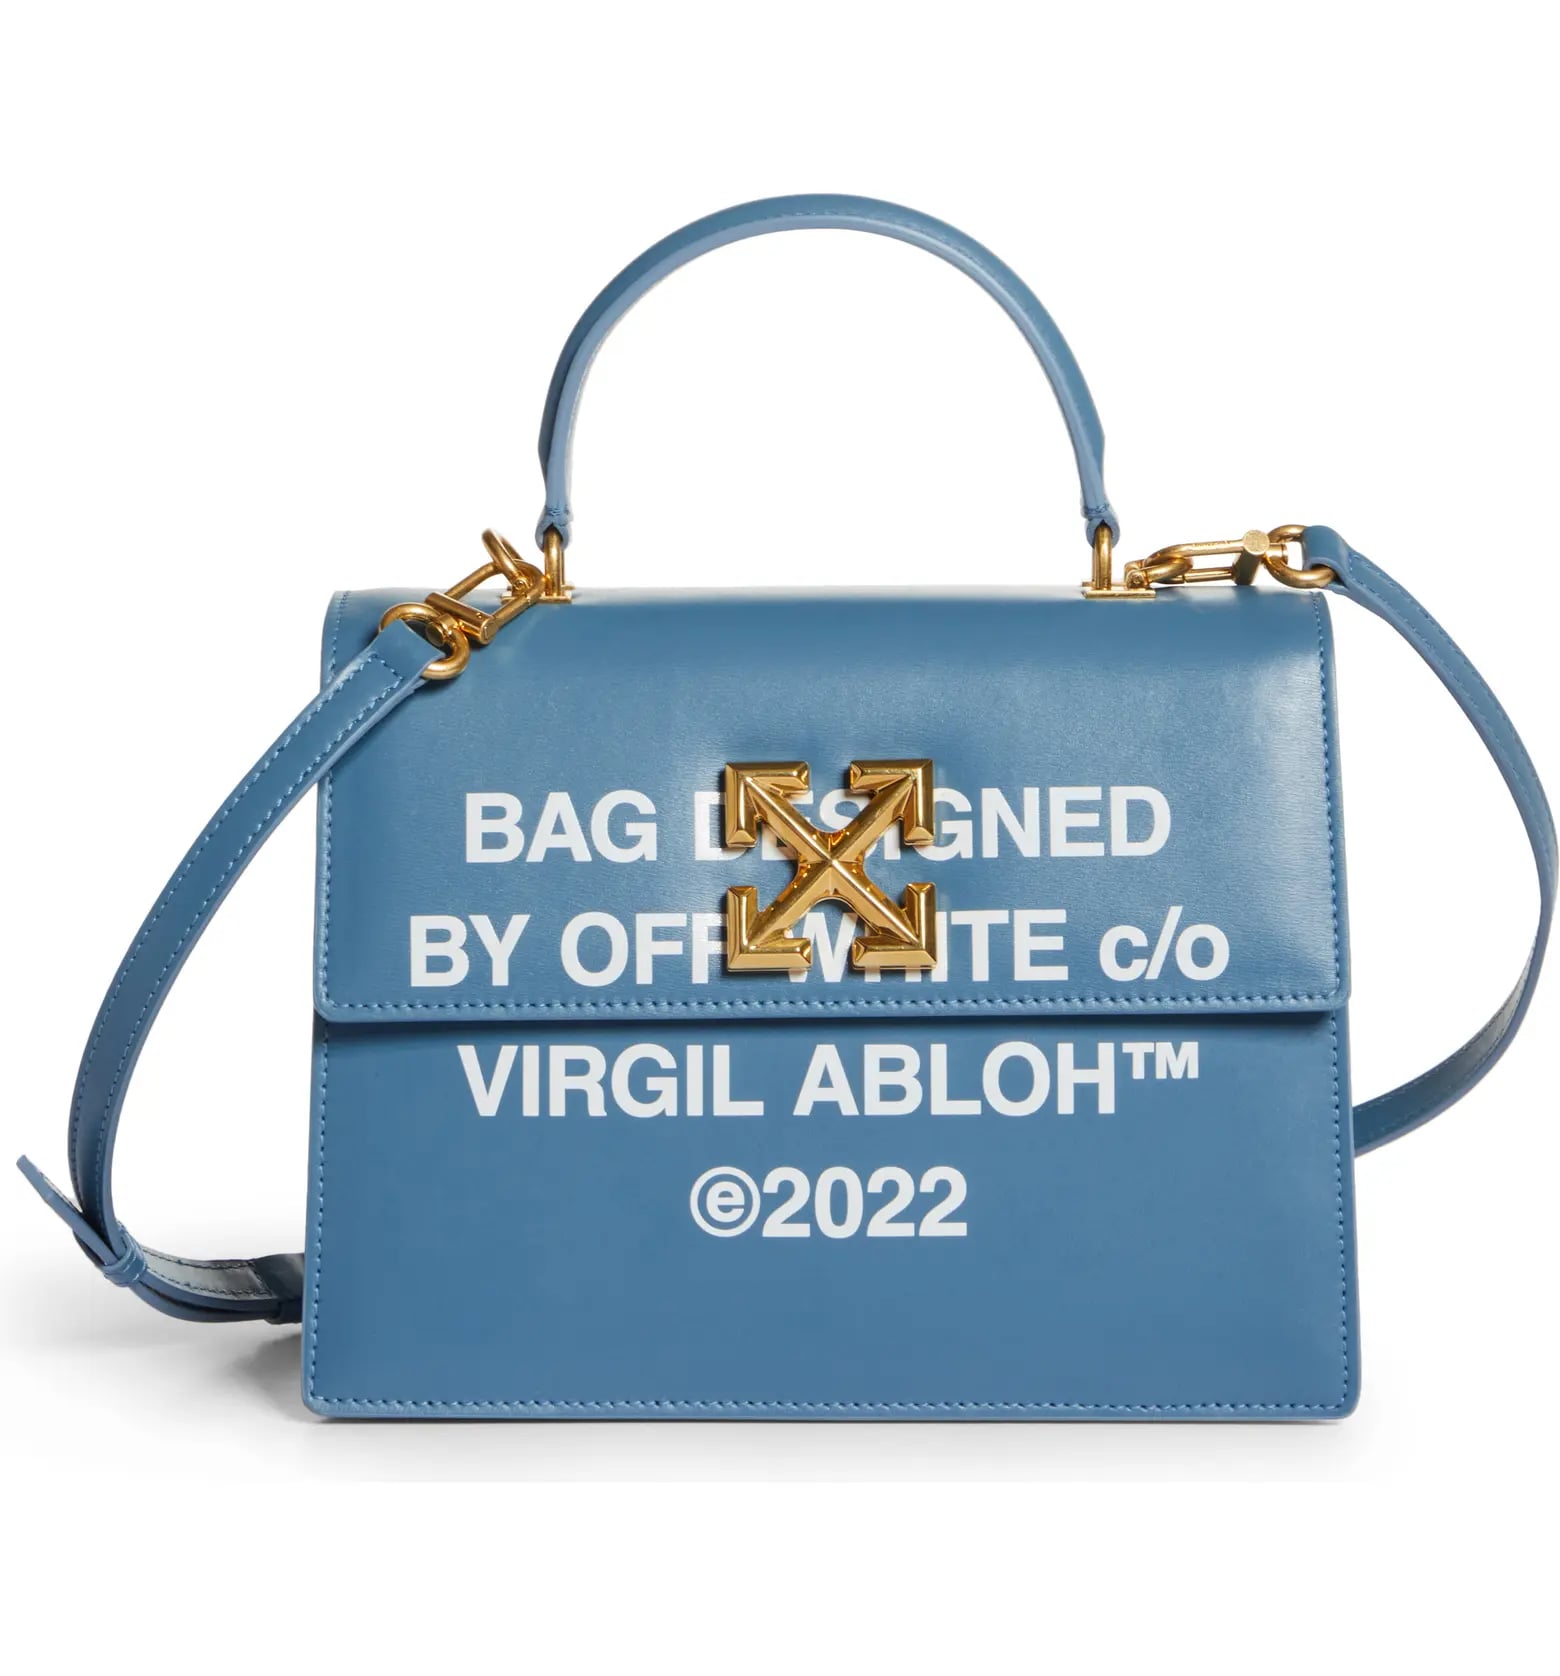 Virgil Abloh Created The Most Spectacular $39,000 Handbag These Eyes Have  Ever Seen - BroBible